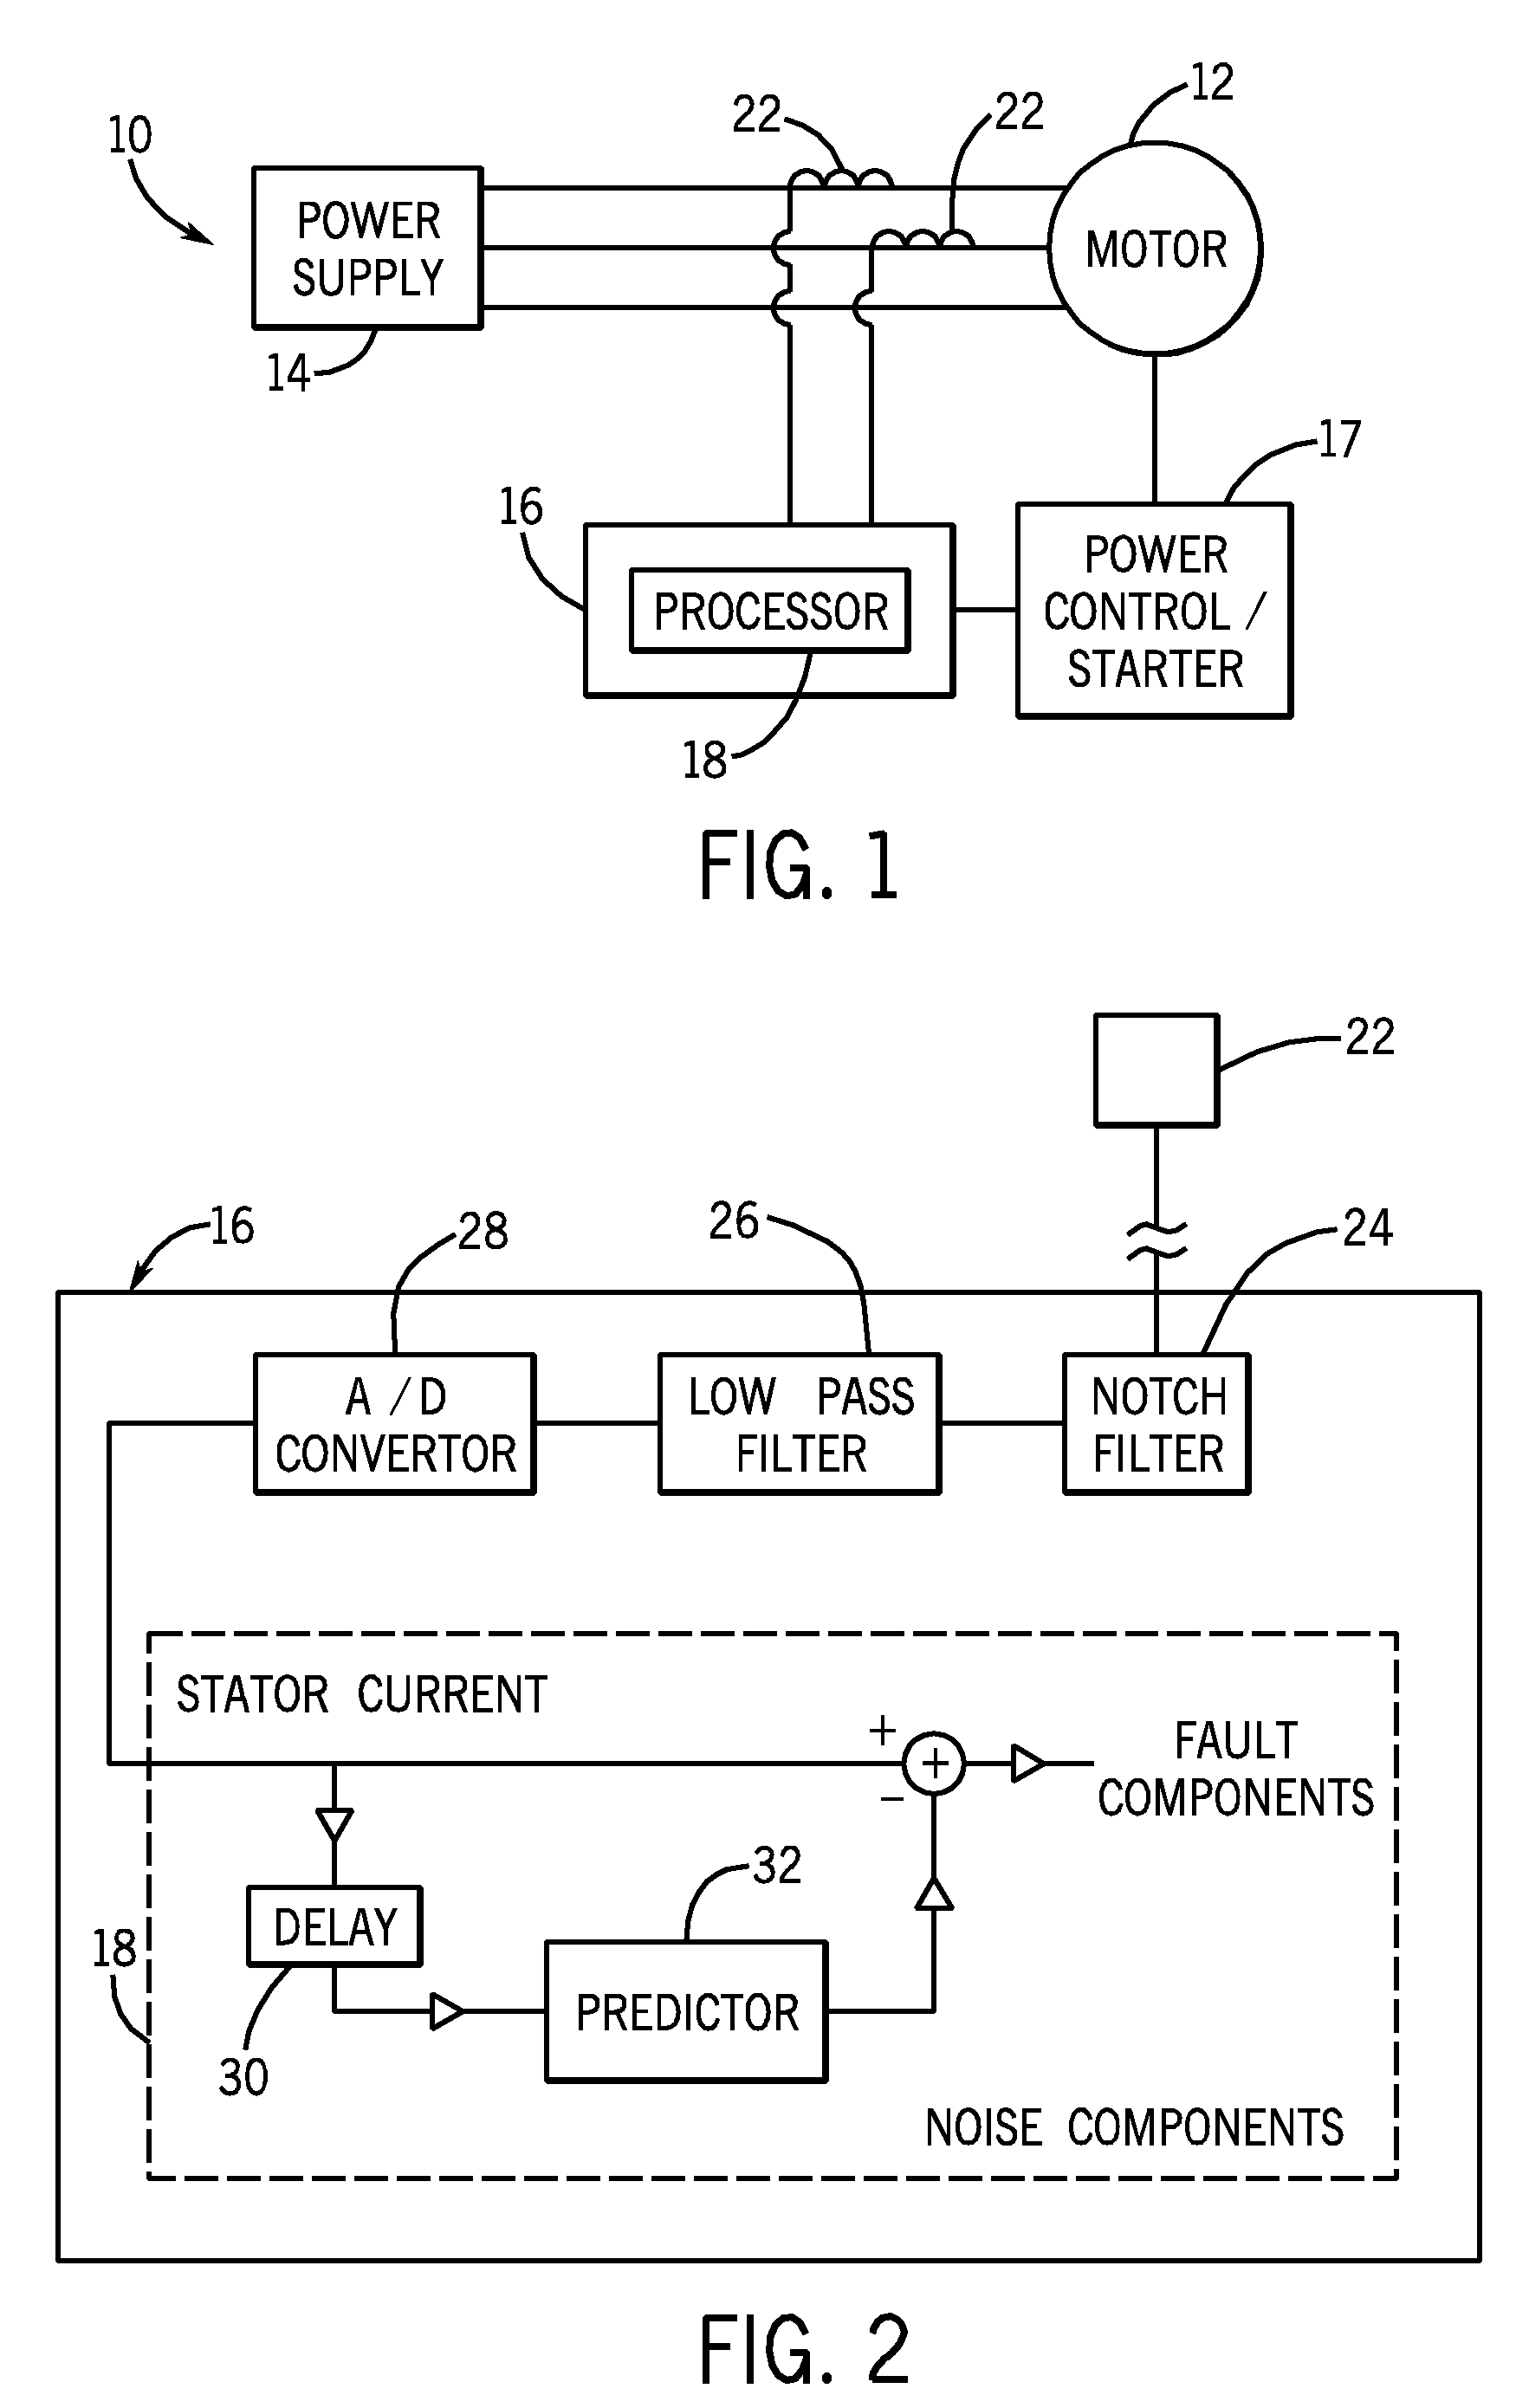 System and method for motor fault detection using stator current noise cancellation